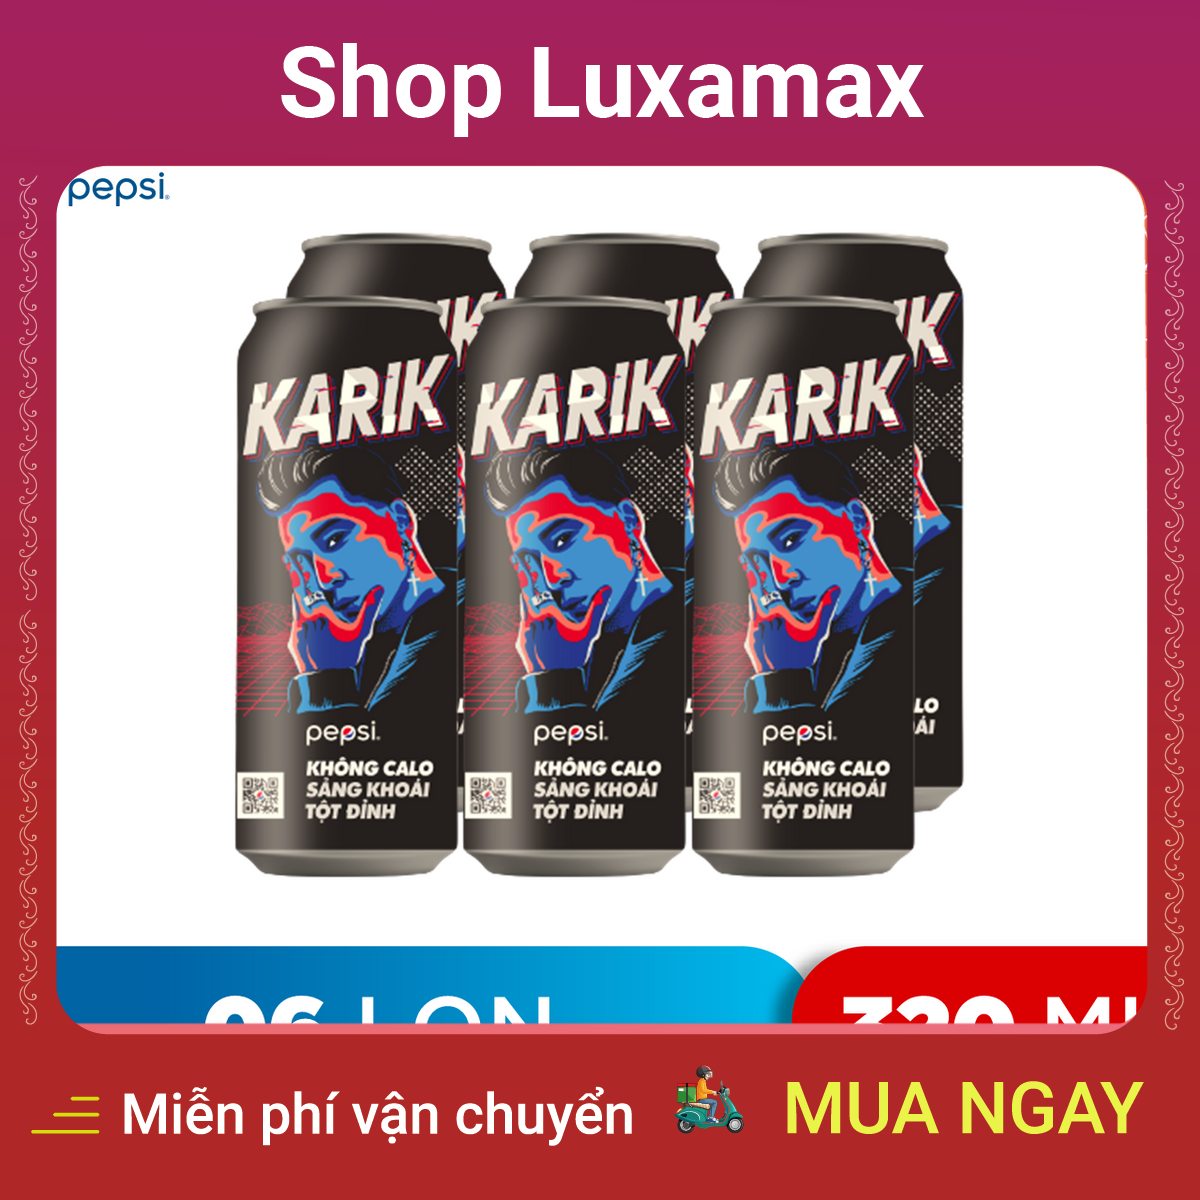 lốc 6 lon nước uống có gaz pepsi không calo (320ml lon) dtk93853755 - shop luxamax - 6 cans of drinking water with gaz pepsi without calories (320ml cans) 1